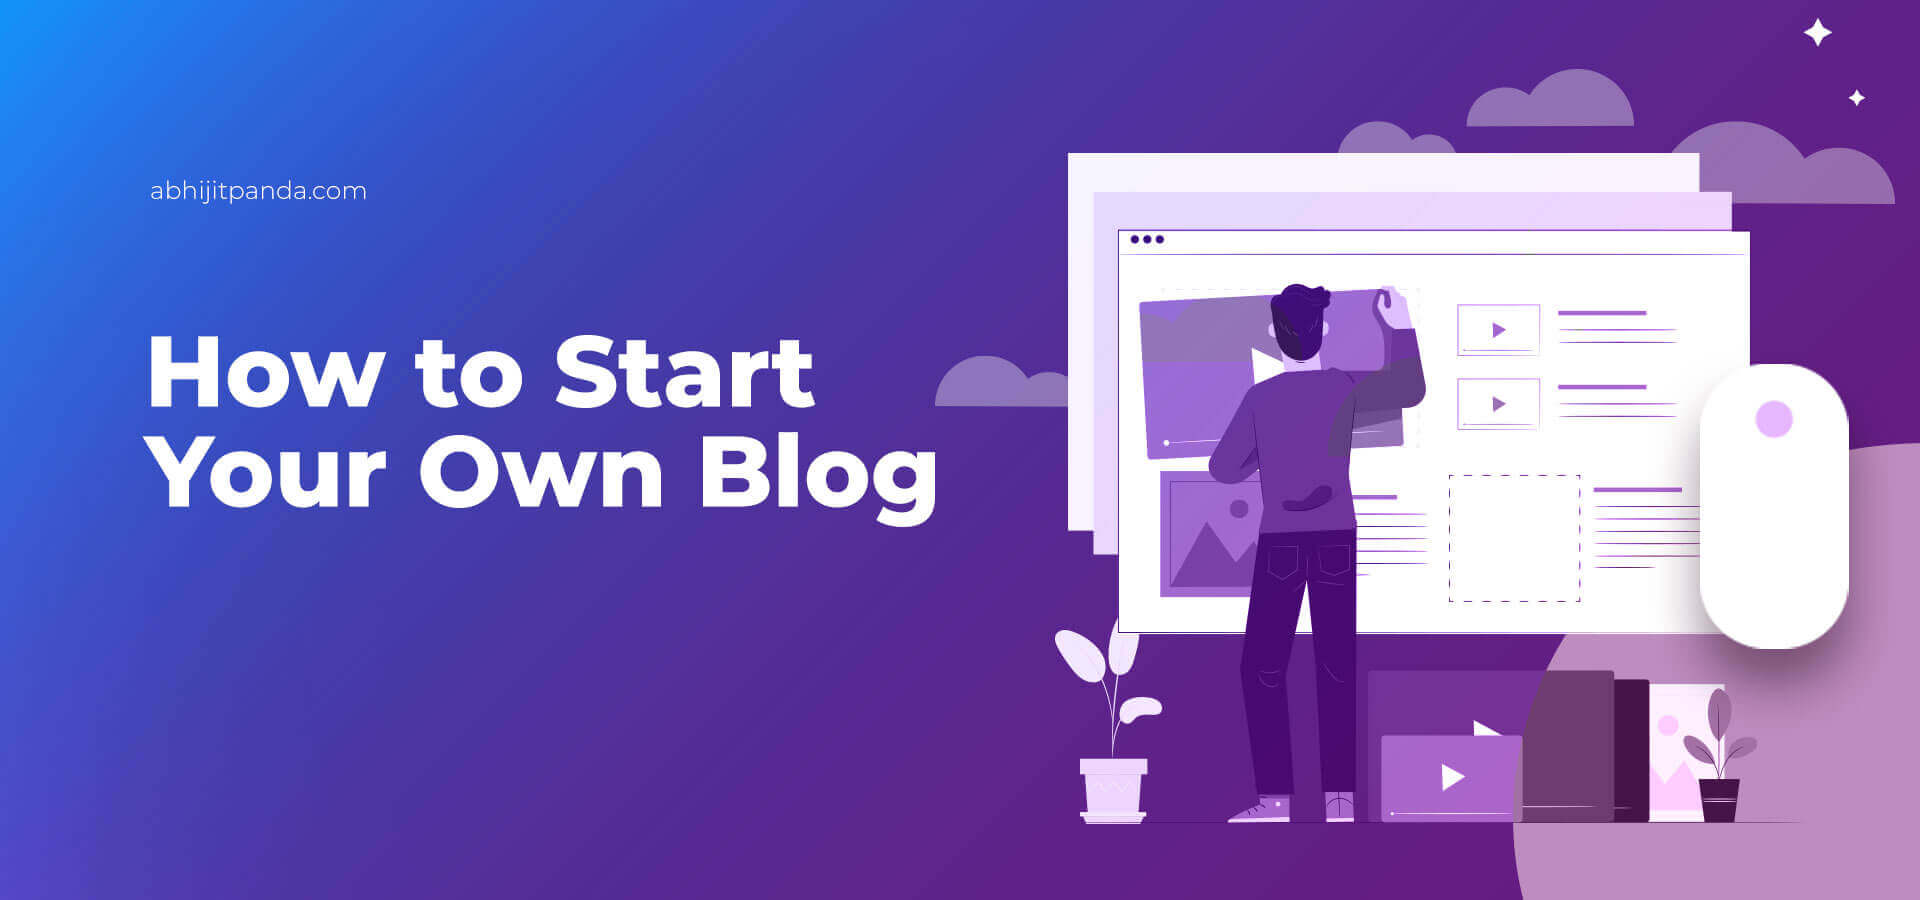 Create Your Own Blog Site